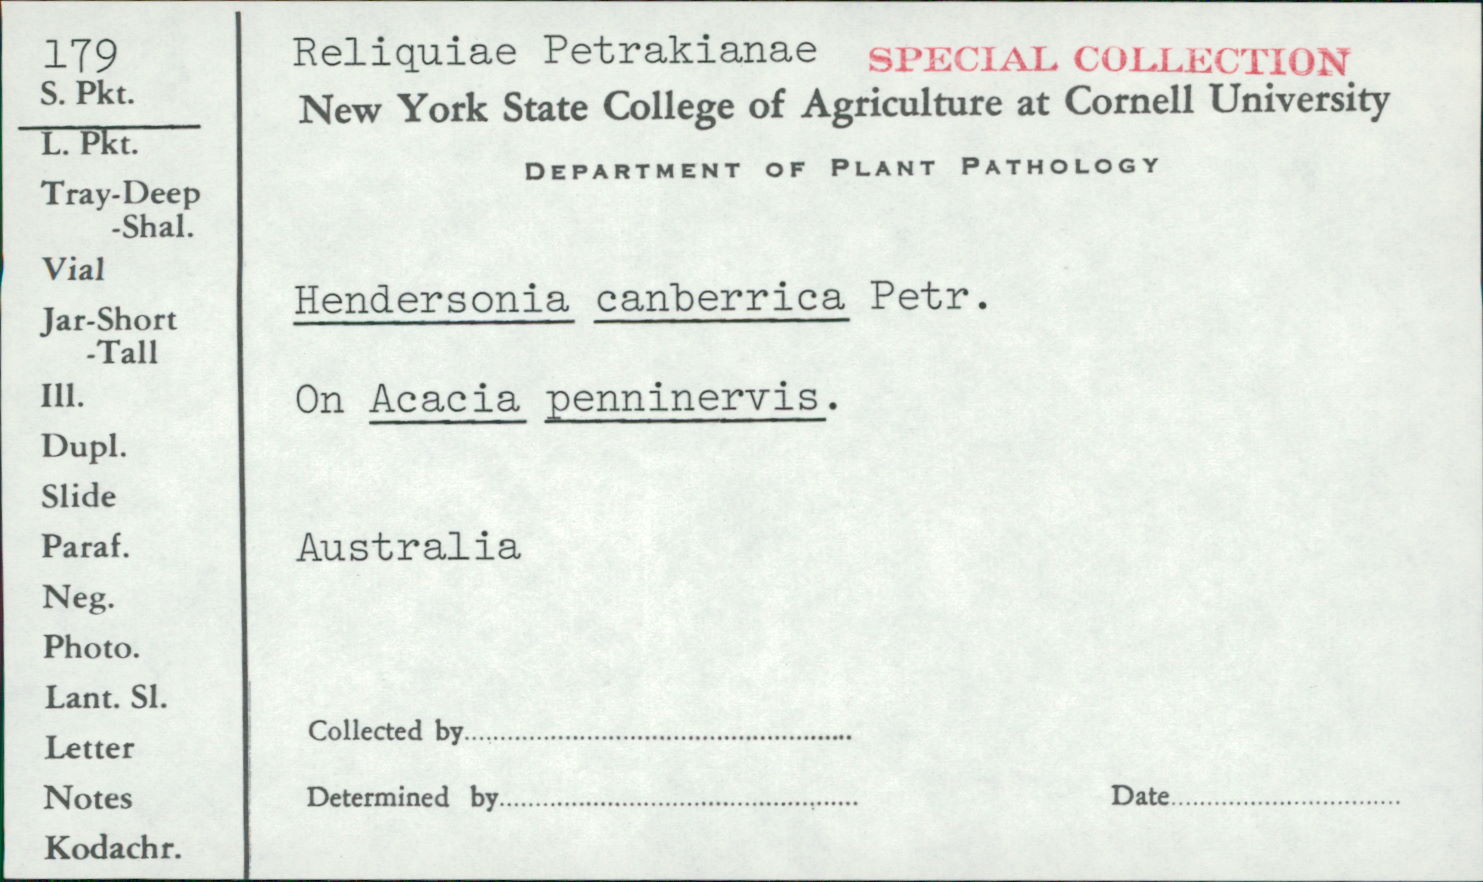 Hendersonia canberrica image